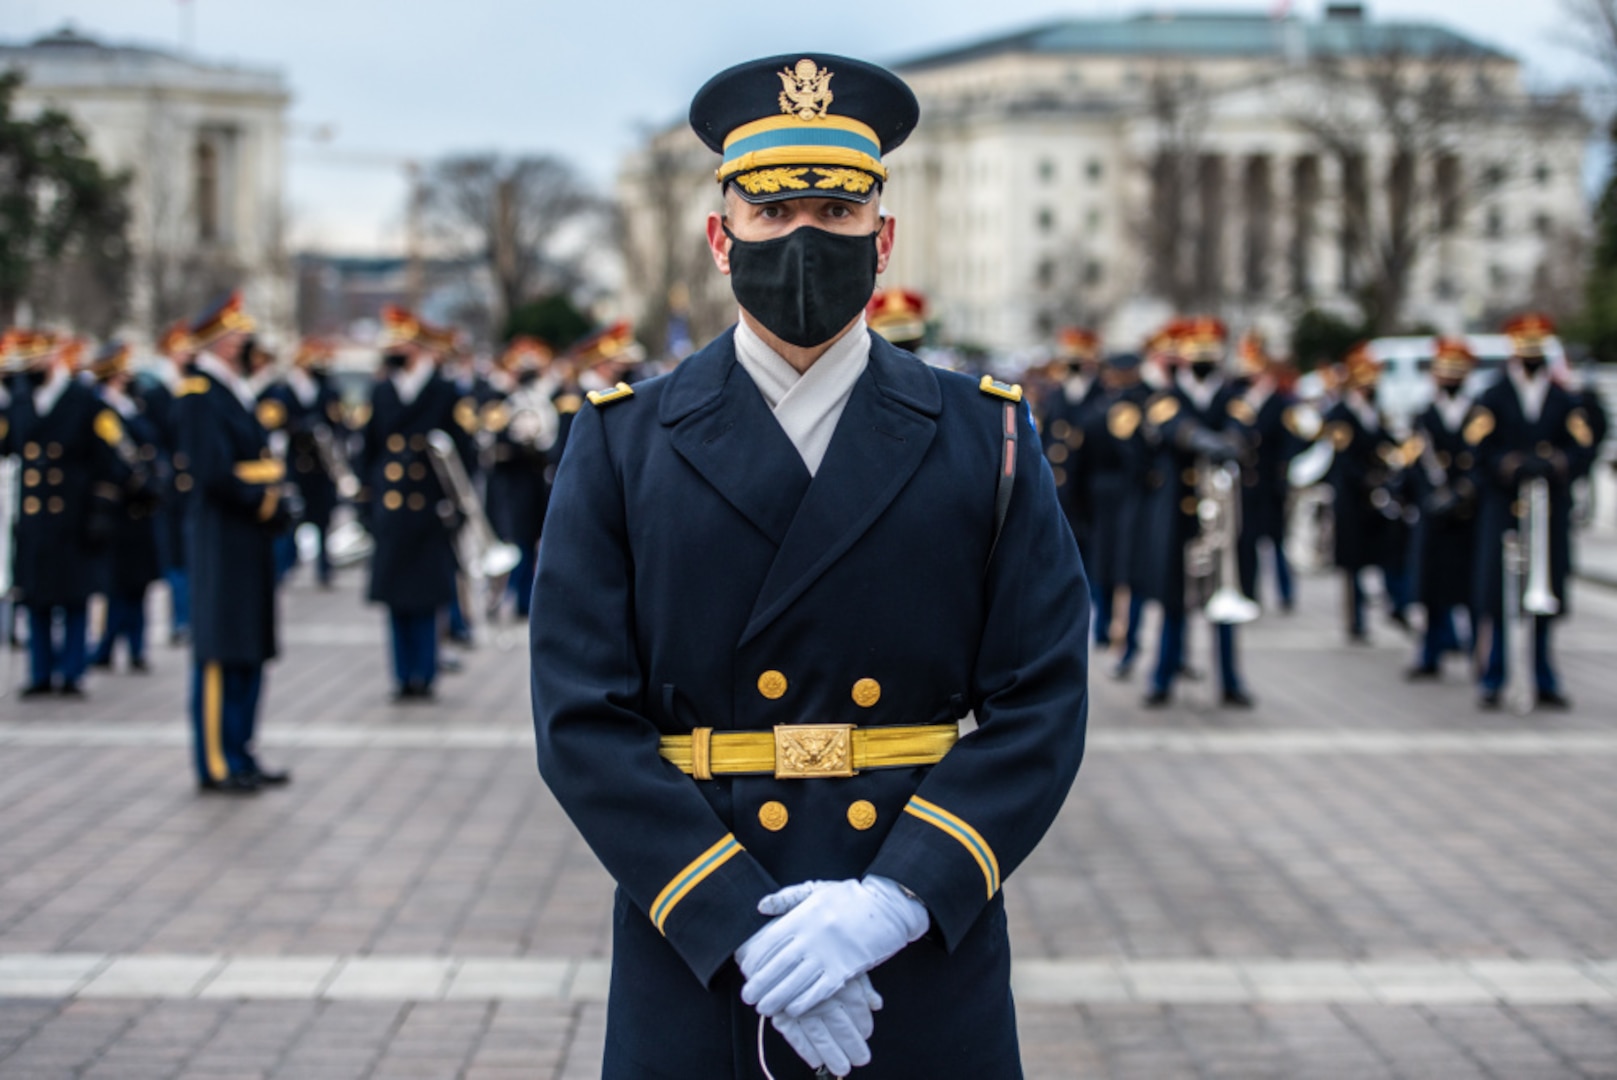 A soldier of the Army's Old Guard stands in the foreground of other soldiers all in service dress.